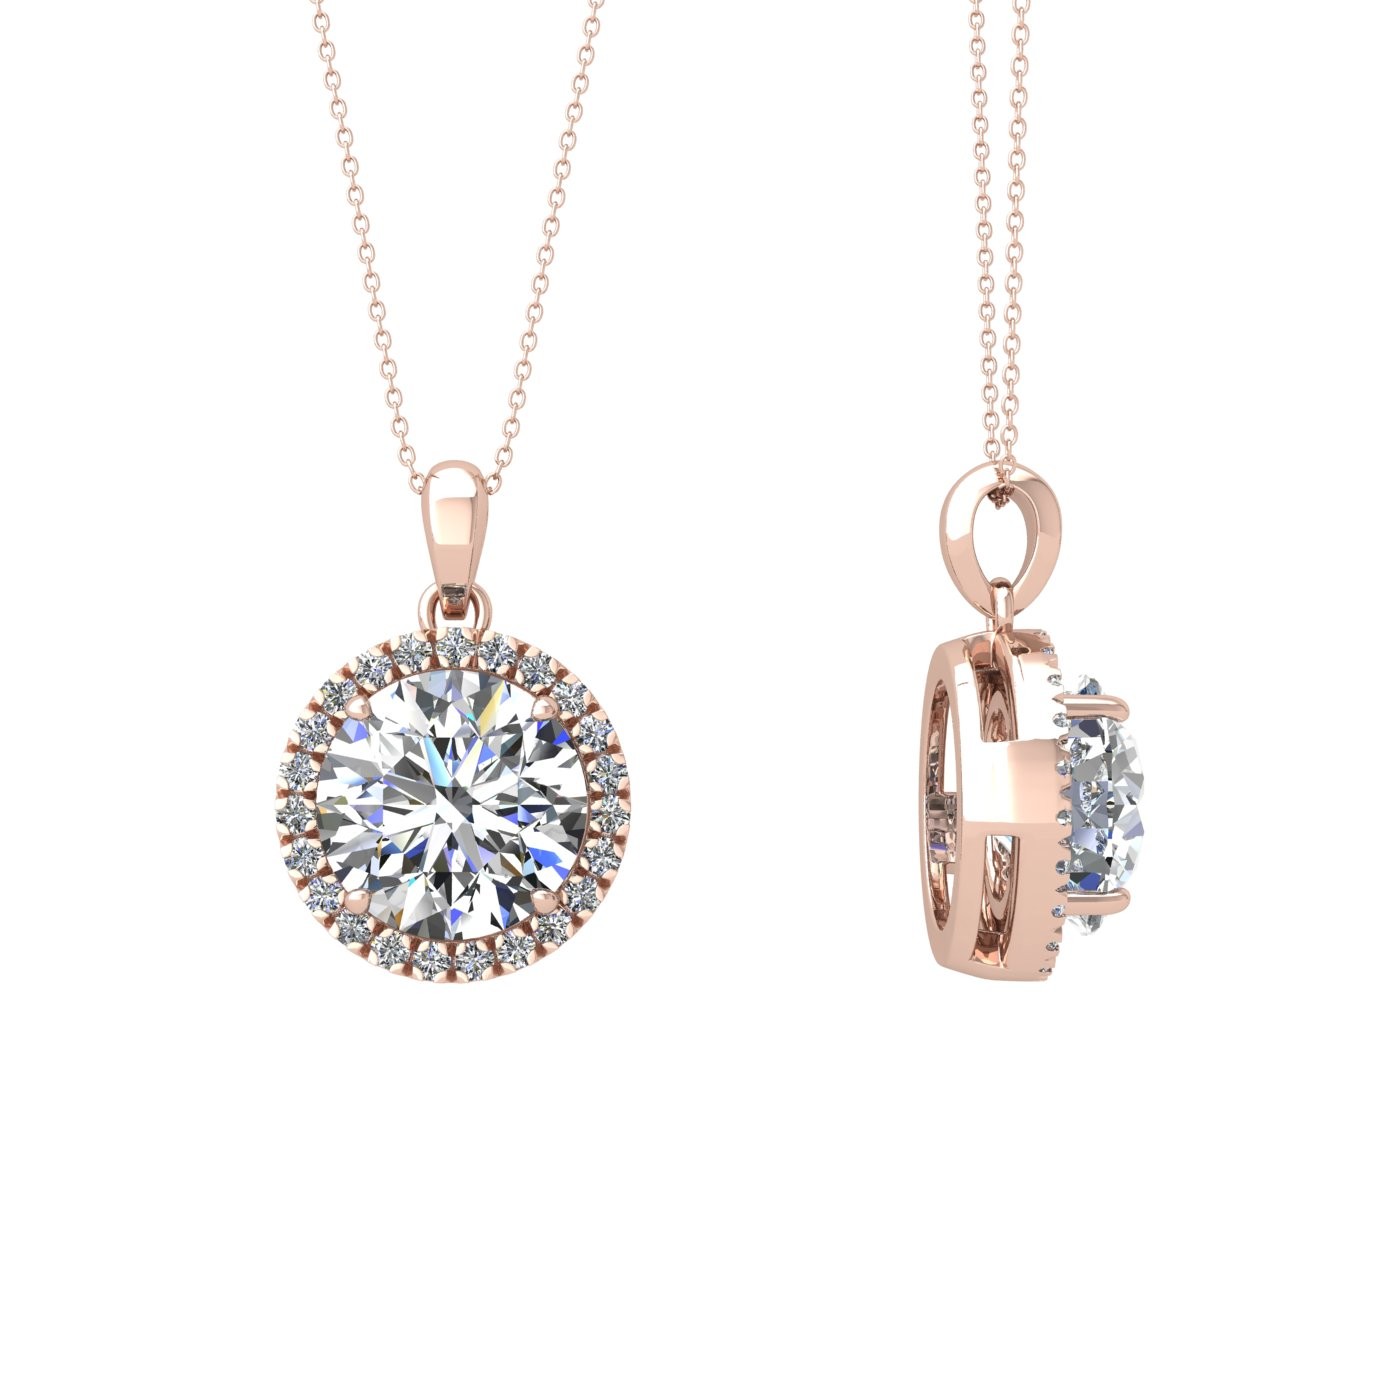 18k rose gold 1,2 ct 4 prong round shape diamond pendant with diamond pavÉ set halo including chain seperate from the pendant Photos & images